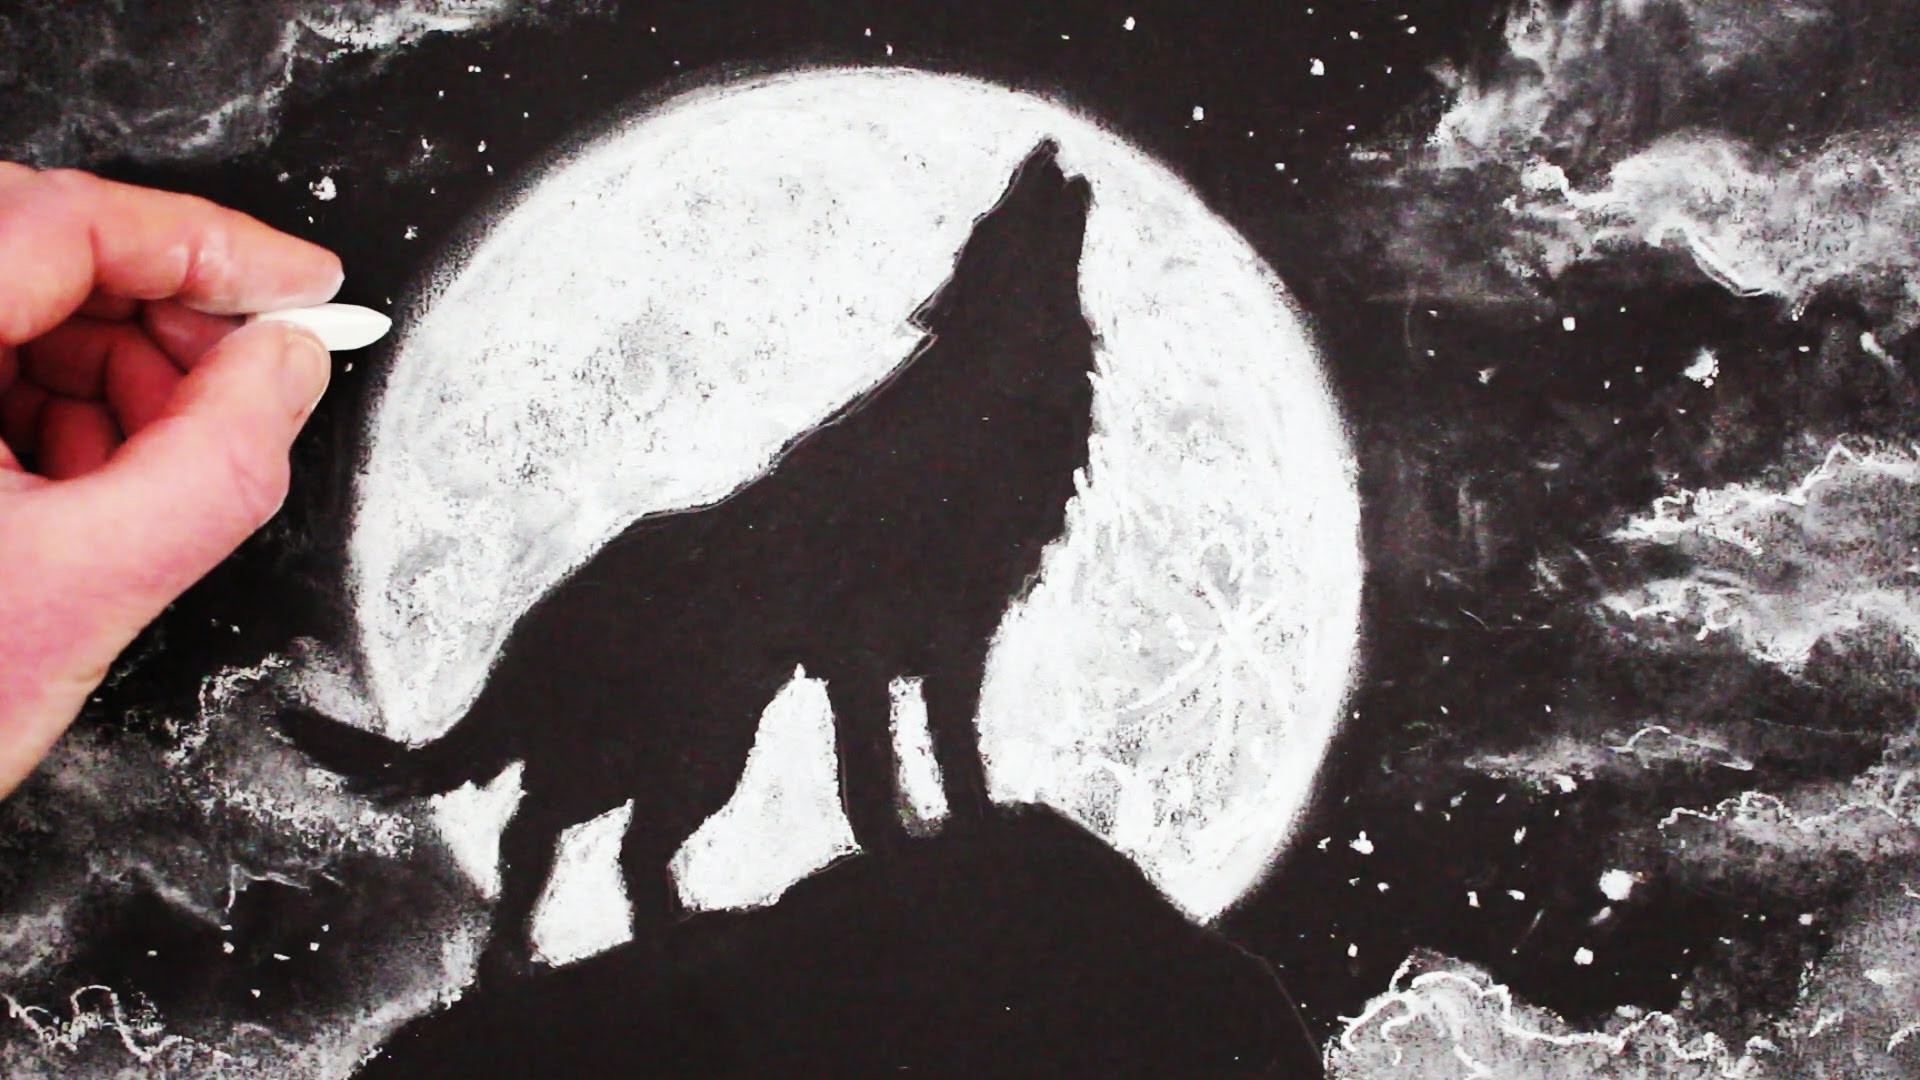 Wolf Howling at the Moon Wallpaper (66+ images)